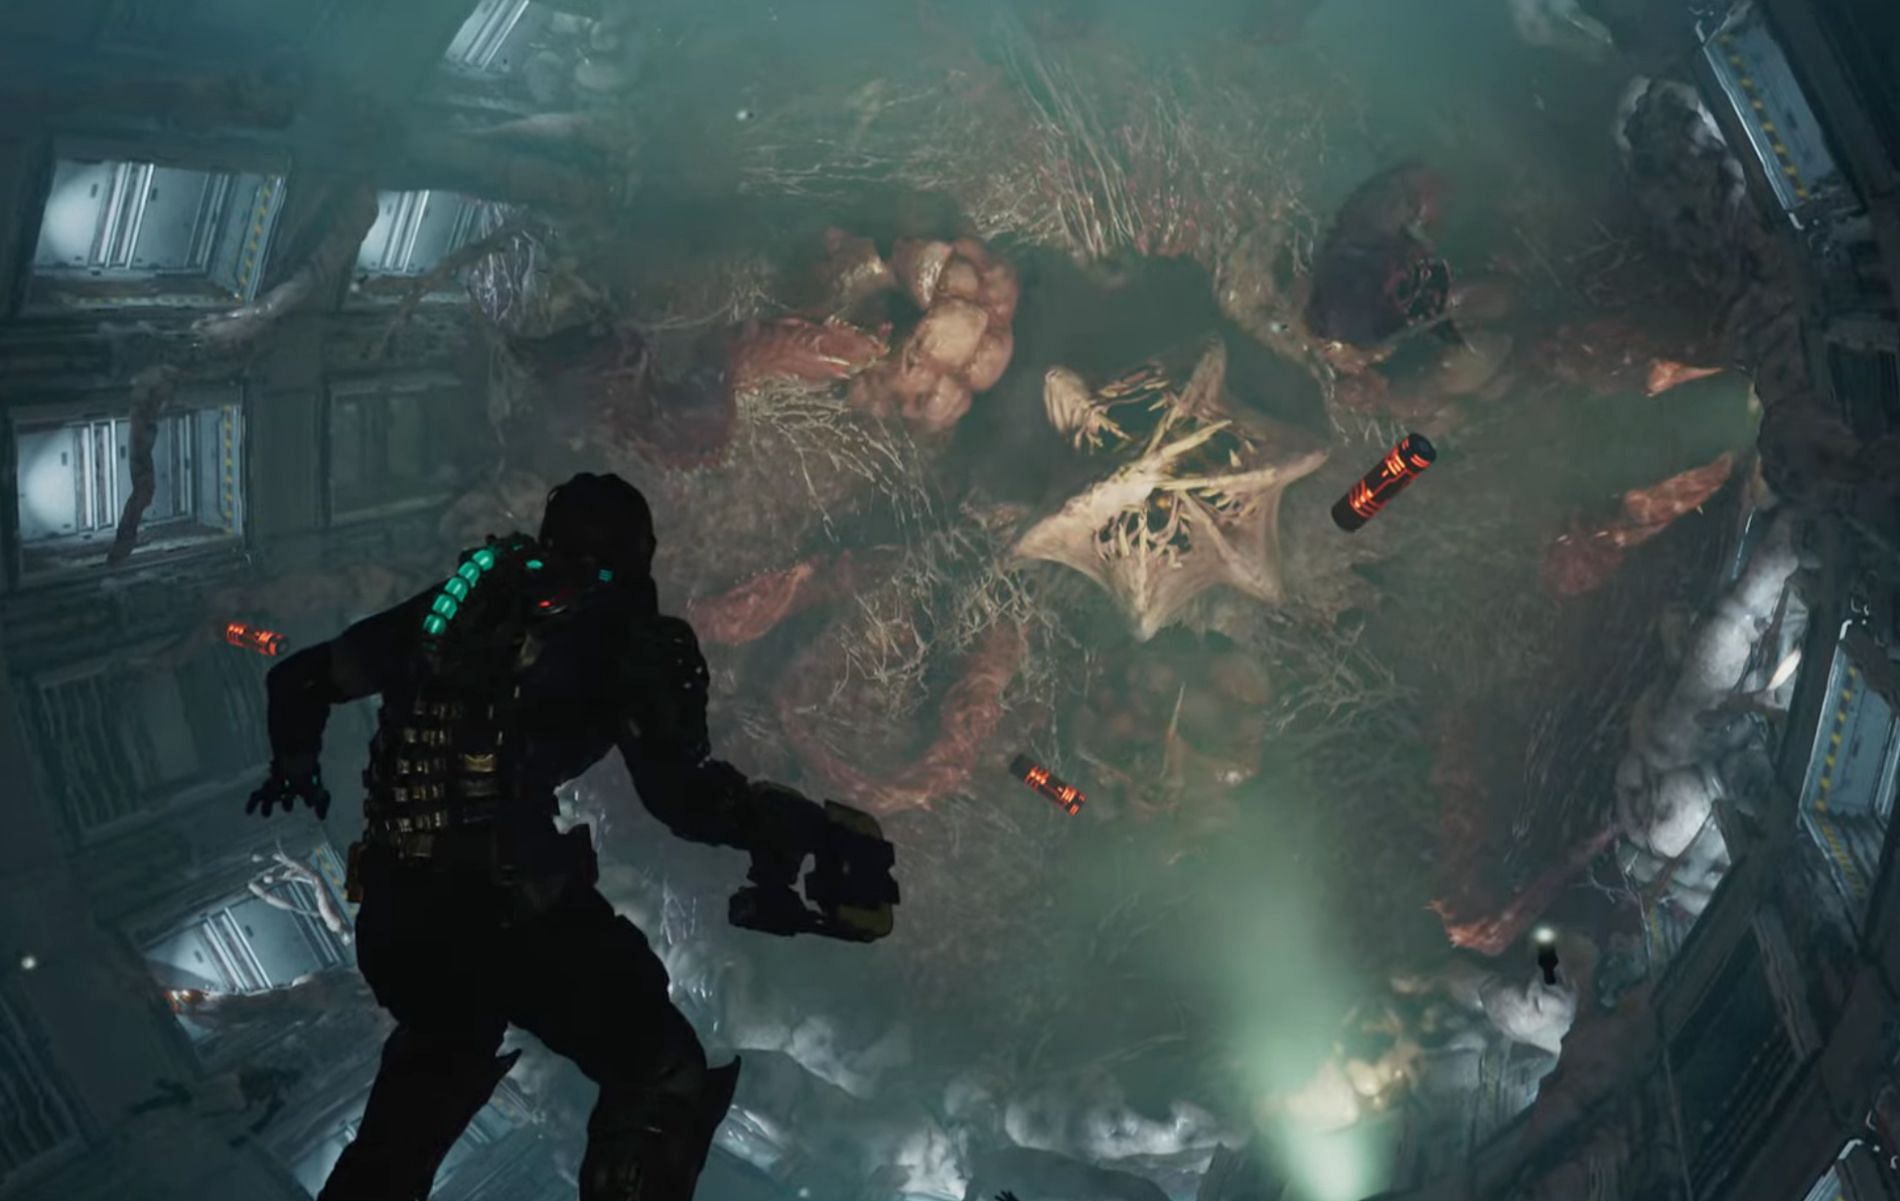 The Leviathan Remnant is a boss who appears in both the remake and the original Dead Space title (Image via Guides Gamepressure/ You Tube)